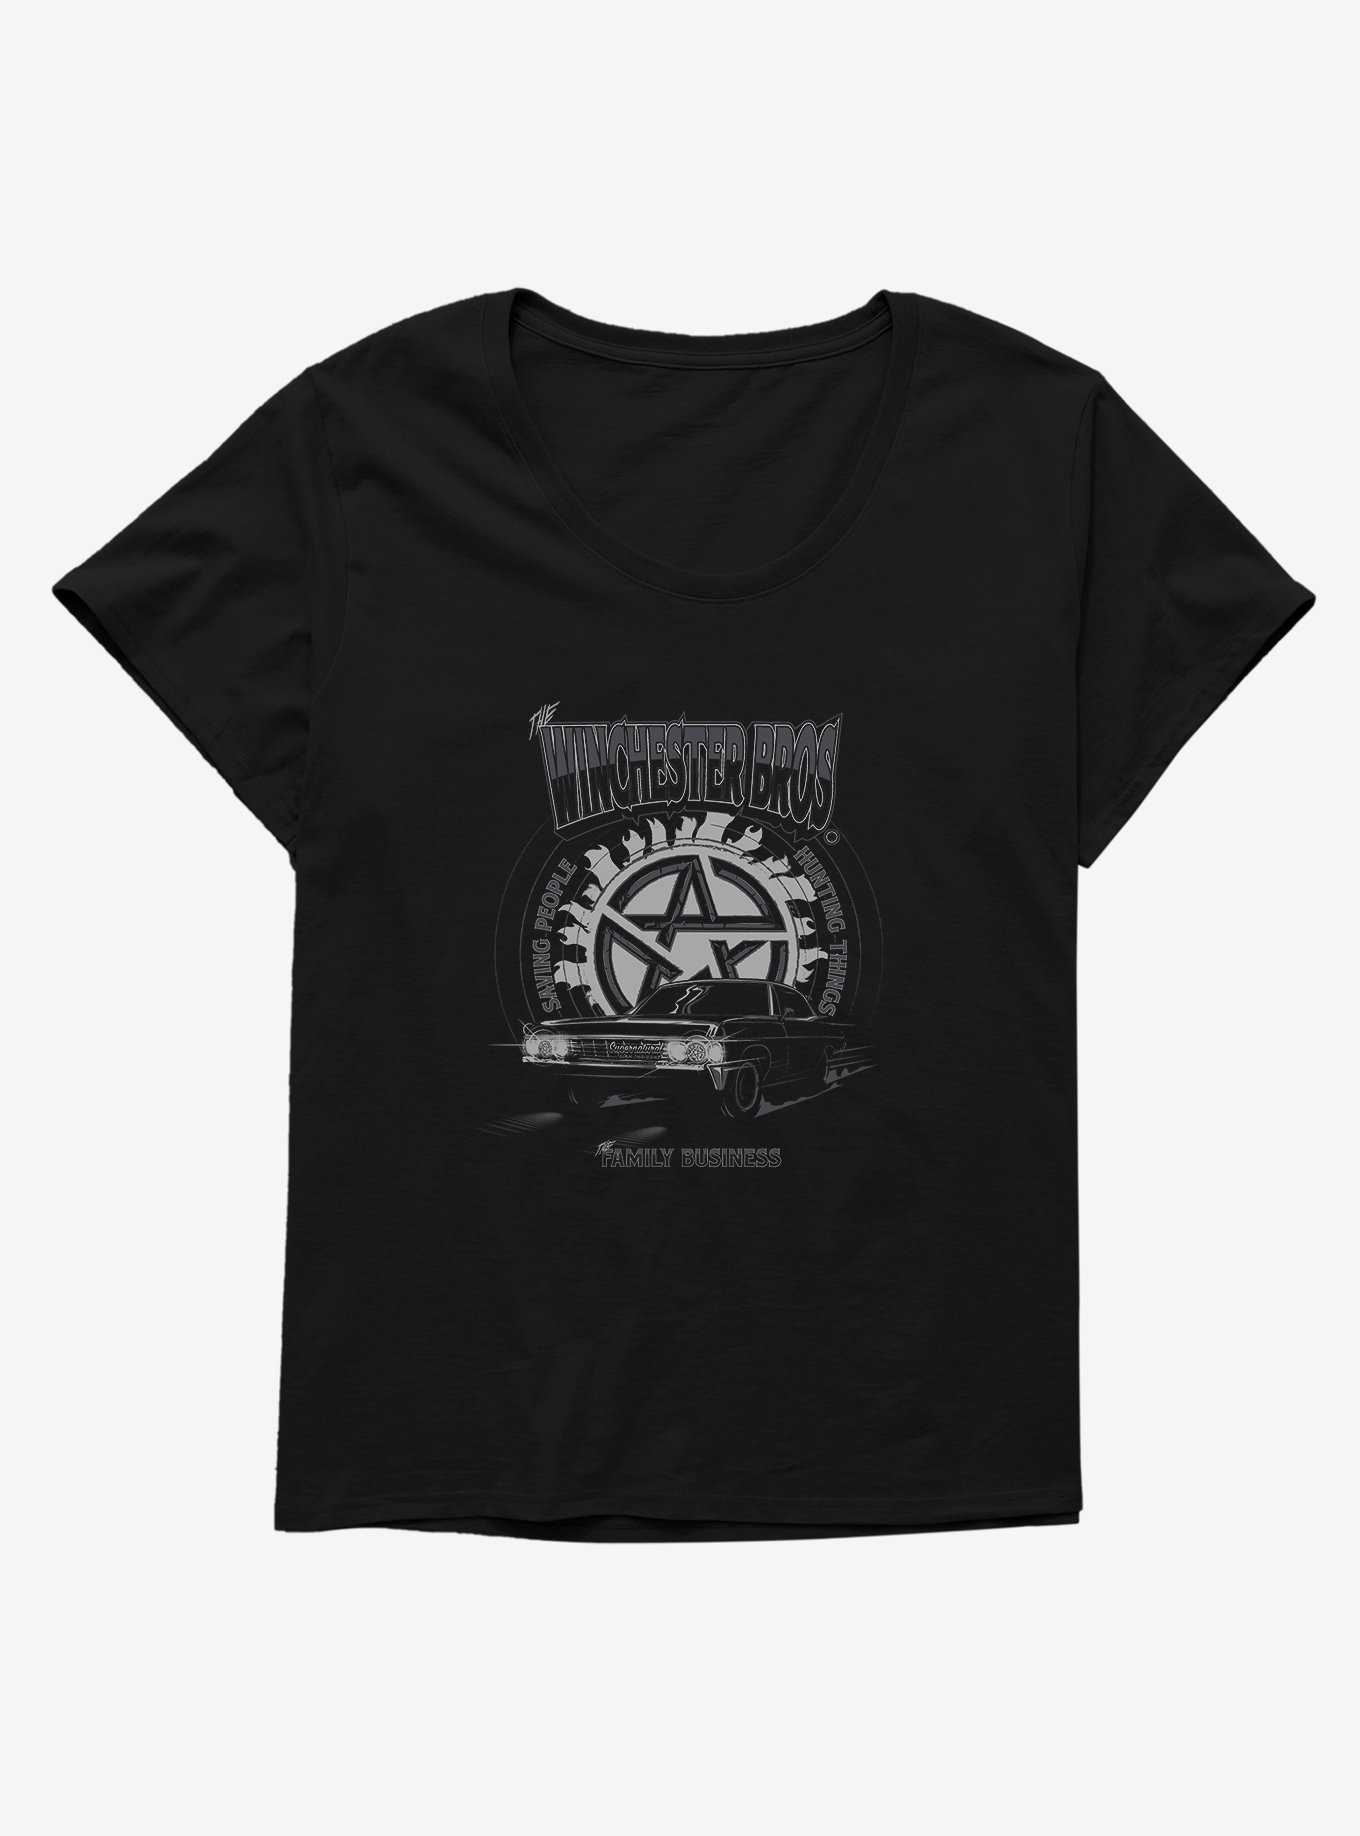 OFFICIAL Supernatural T-Shirts and Merchandise